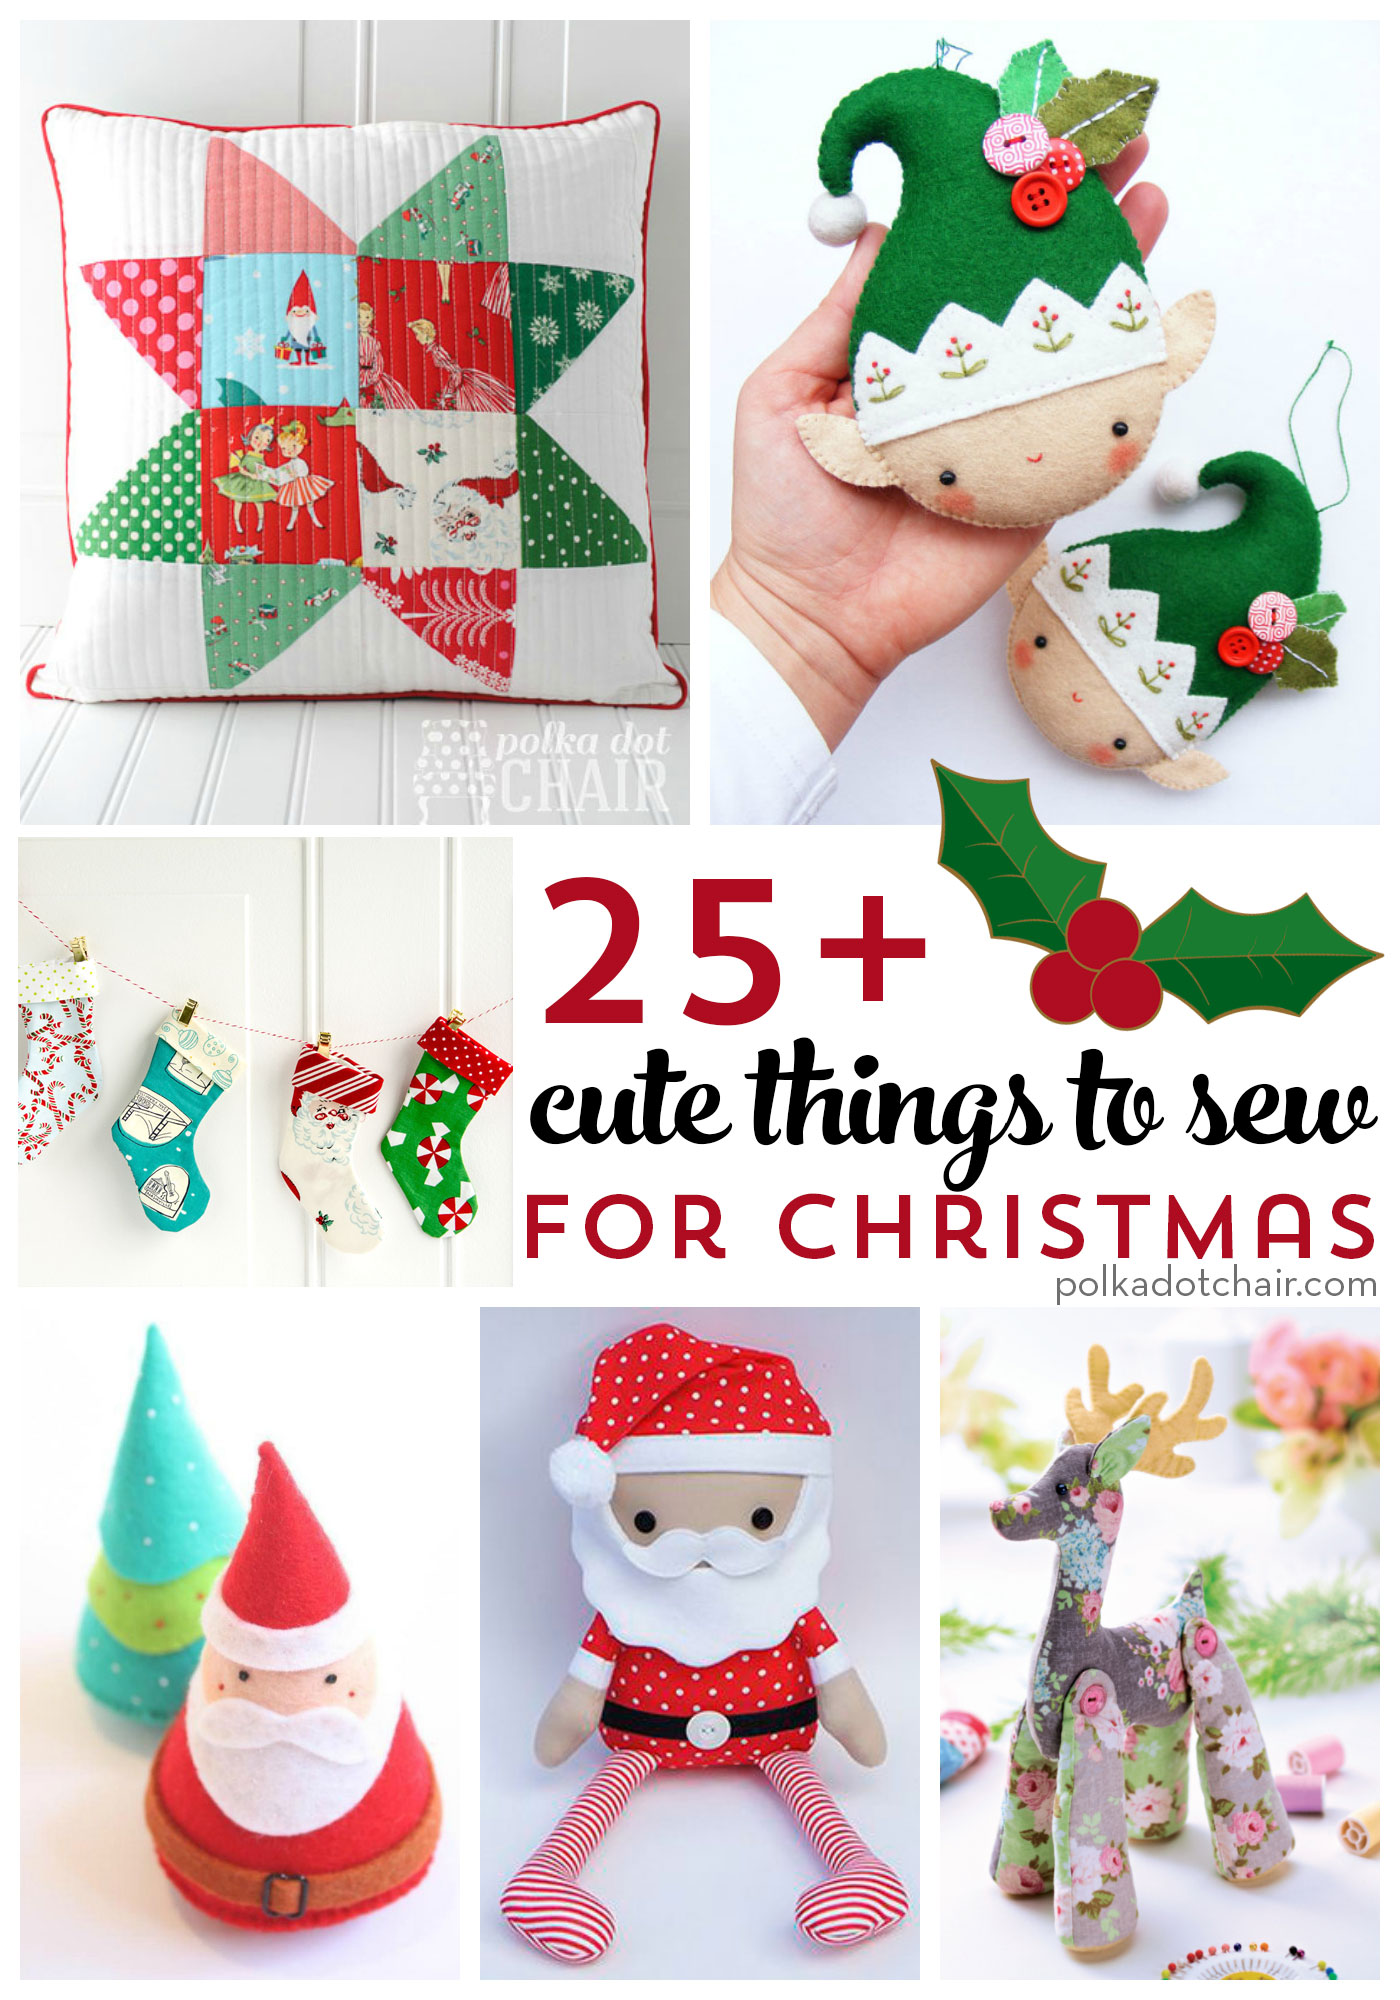 Advent Calendar Hand Embroidery Pattern, Stitch-a-day DIY Christmas Project  